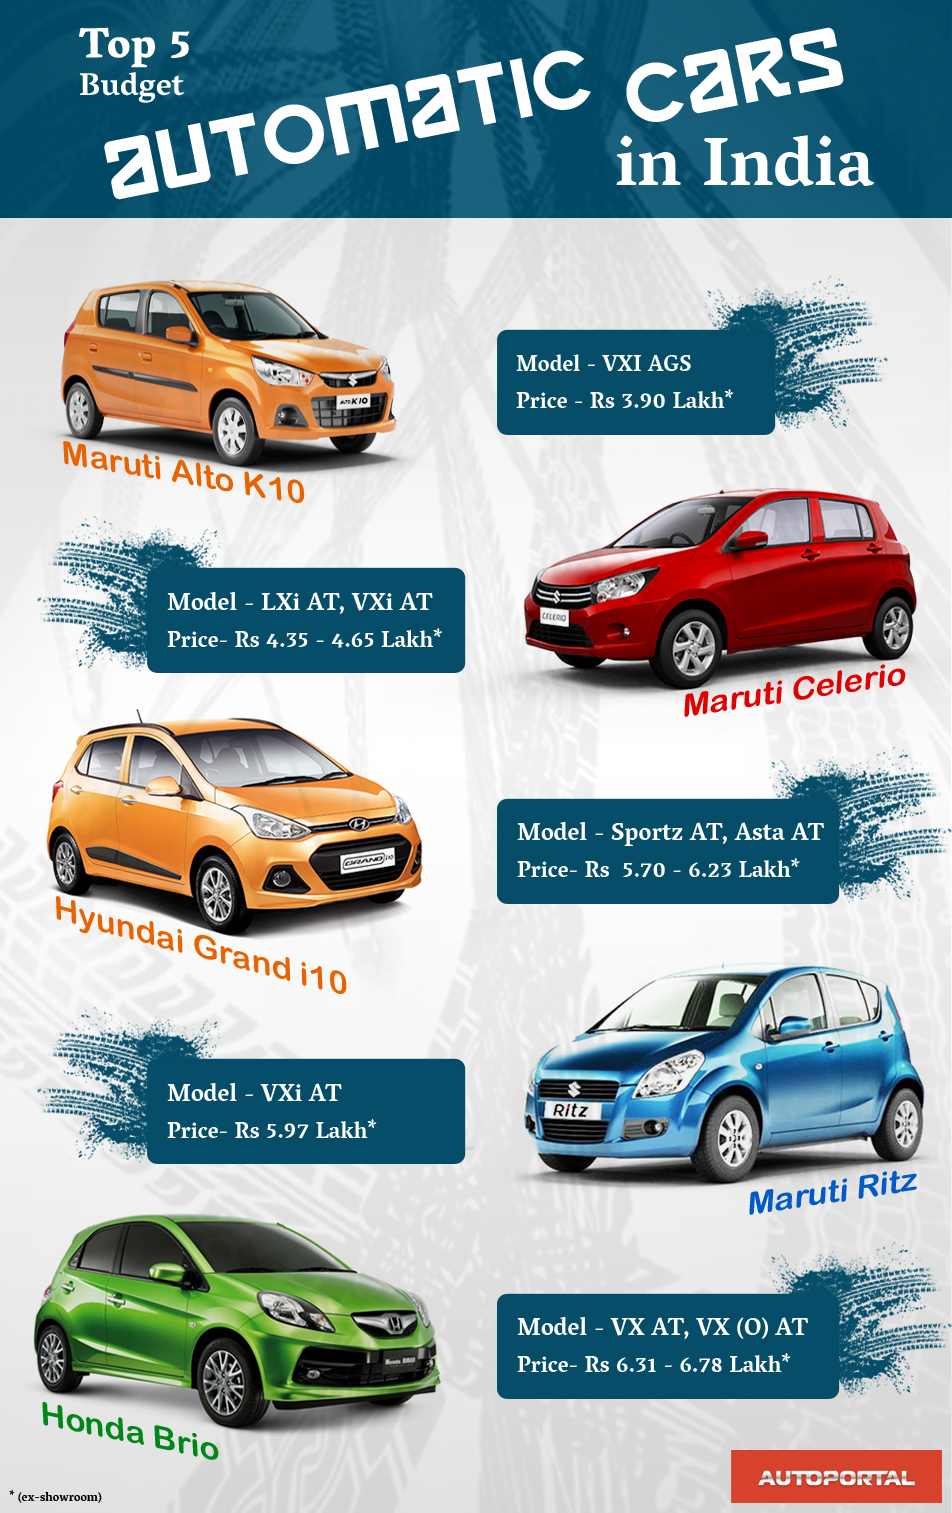 Top 5 budget automatic cars in India Visual.ly